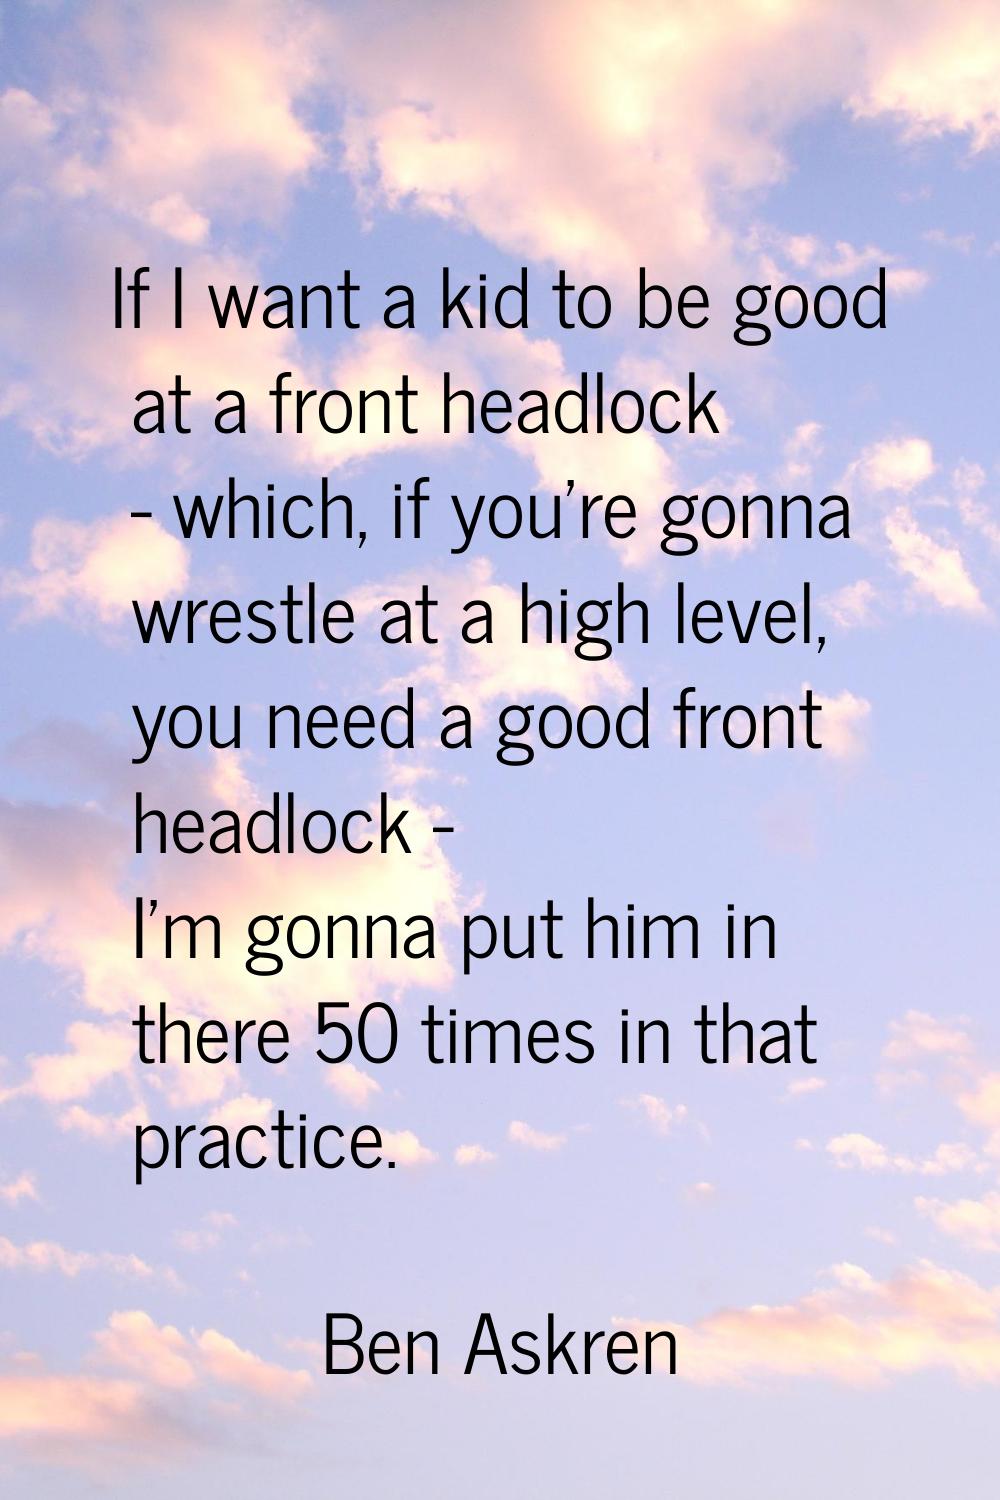 If I want a kid to be good at a front headlock - which, if you're gonna wrestle at a high level, yo